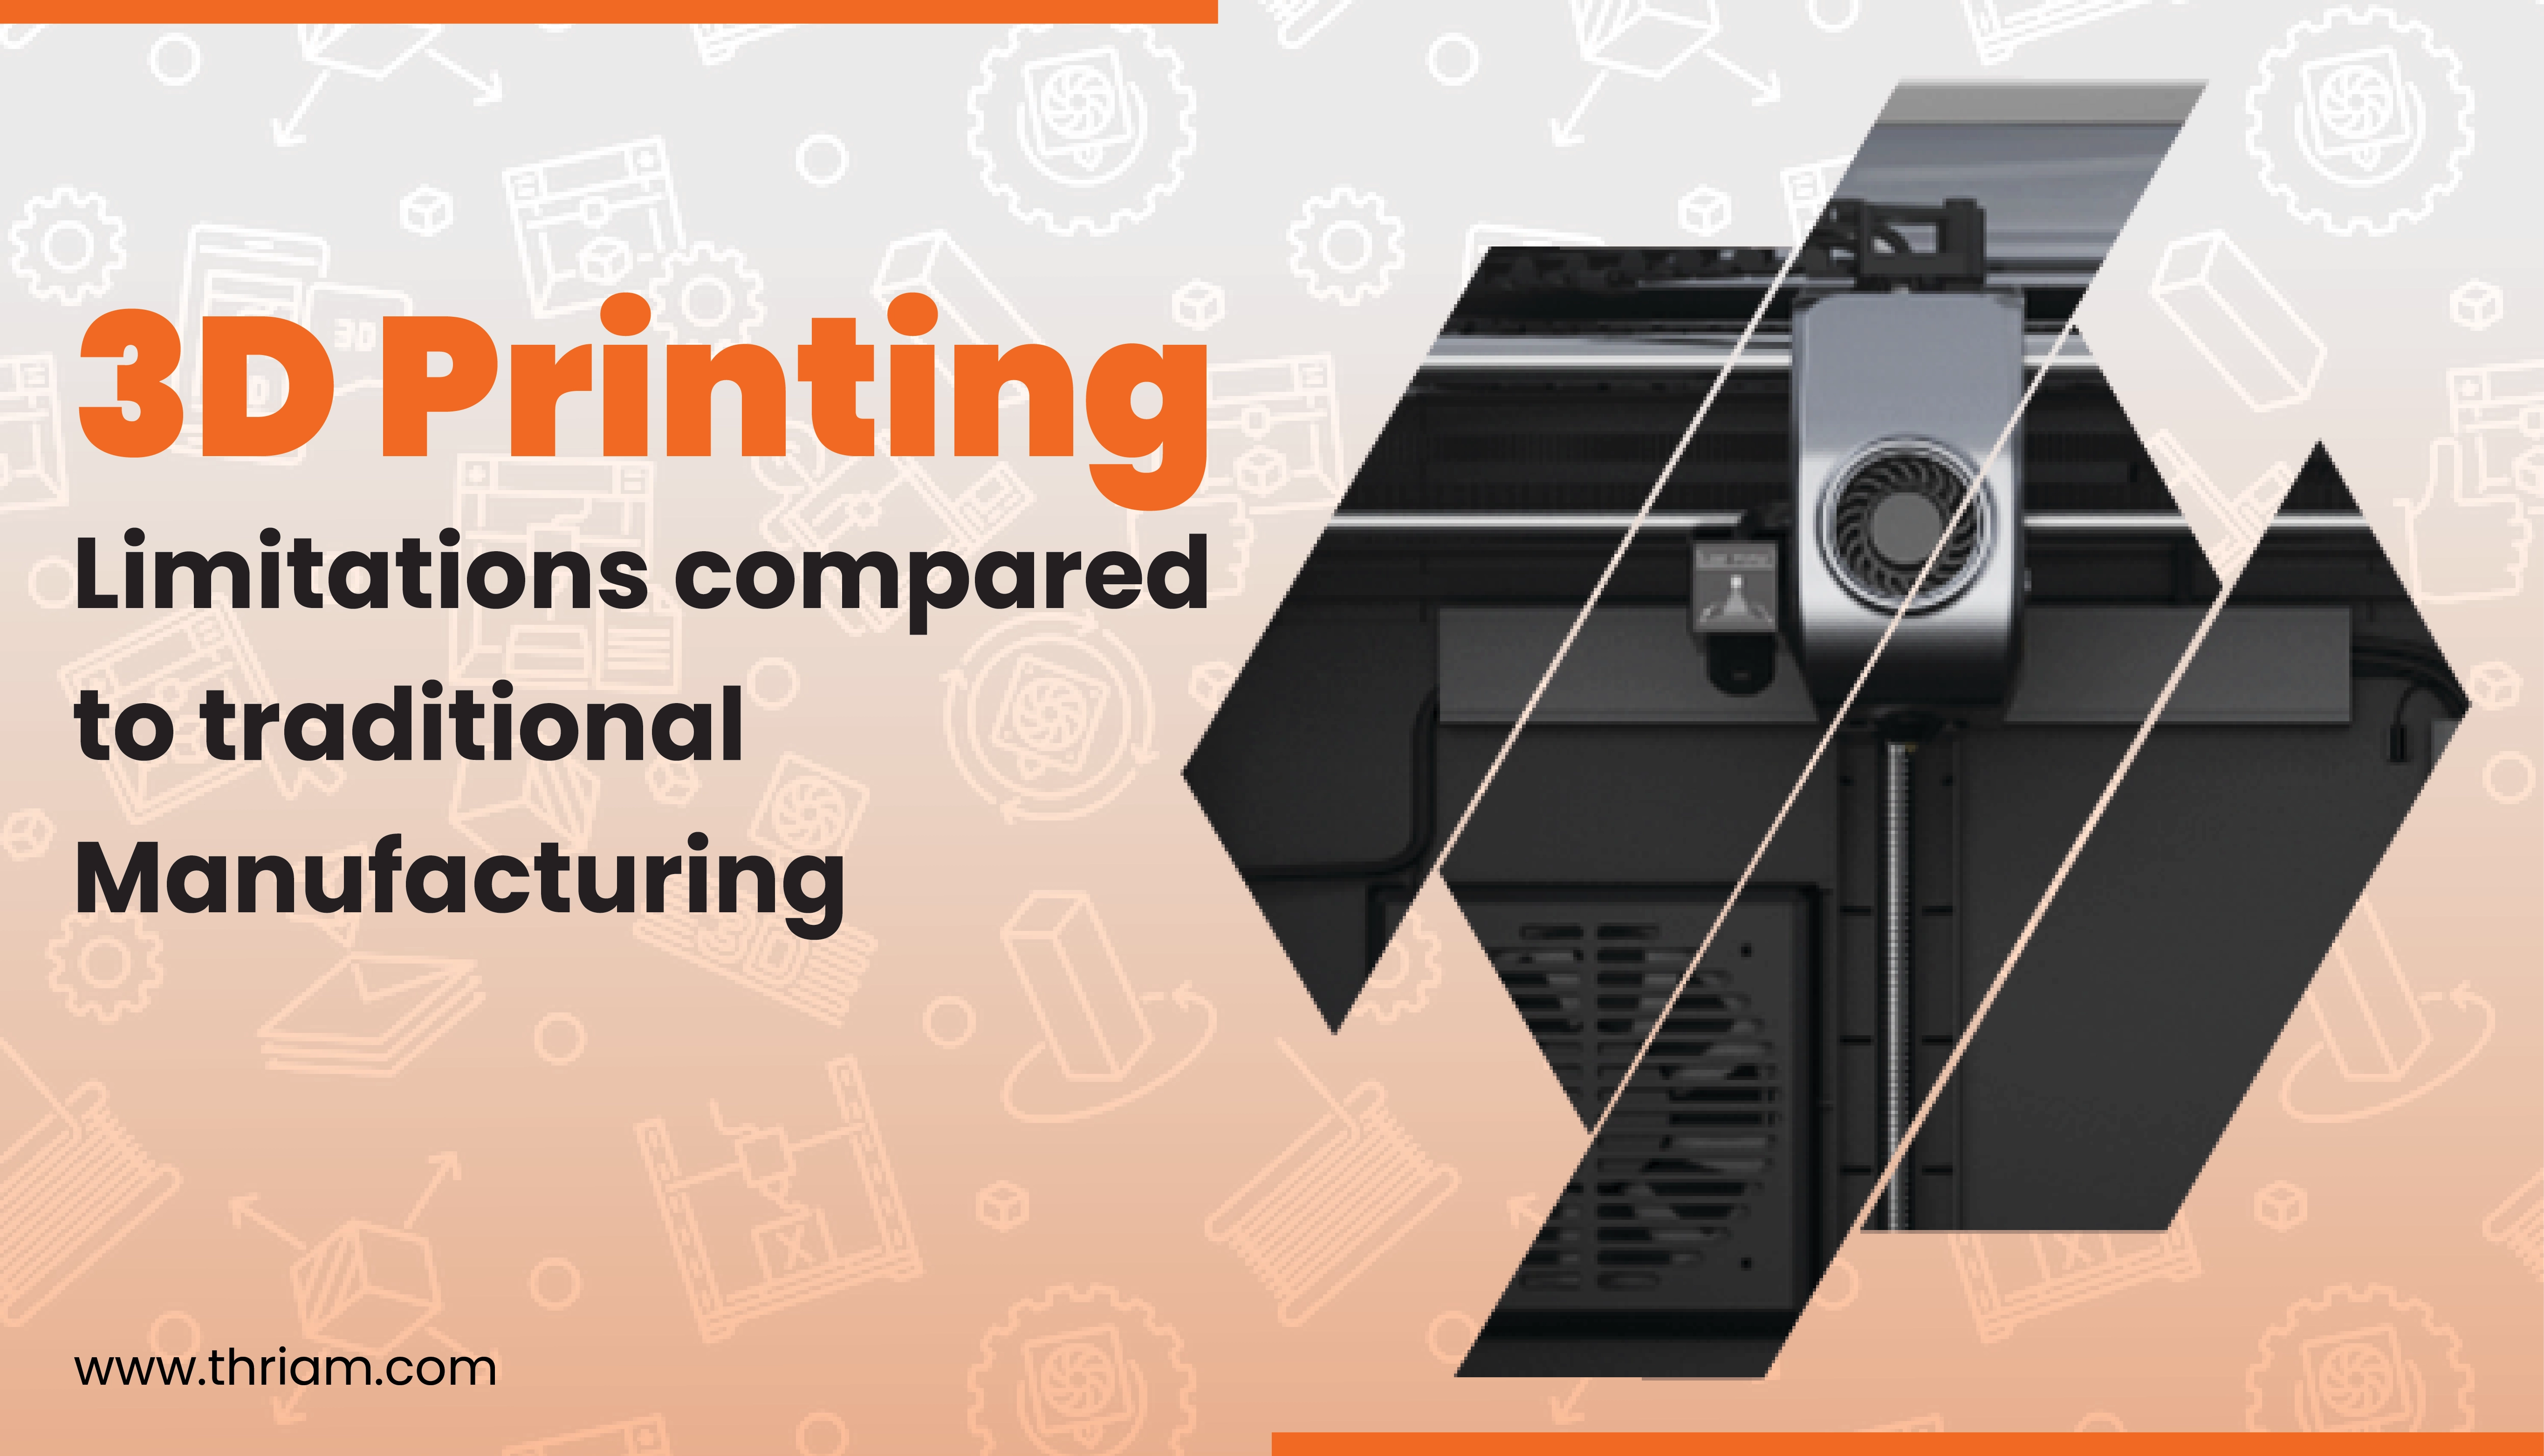 Understanding the Limitations of 3D Printing banner by Thriam